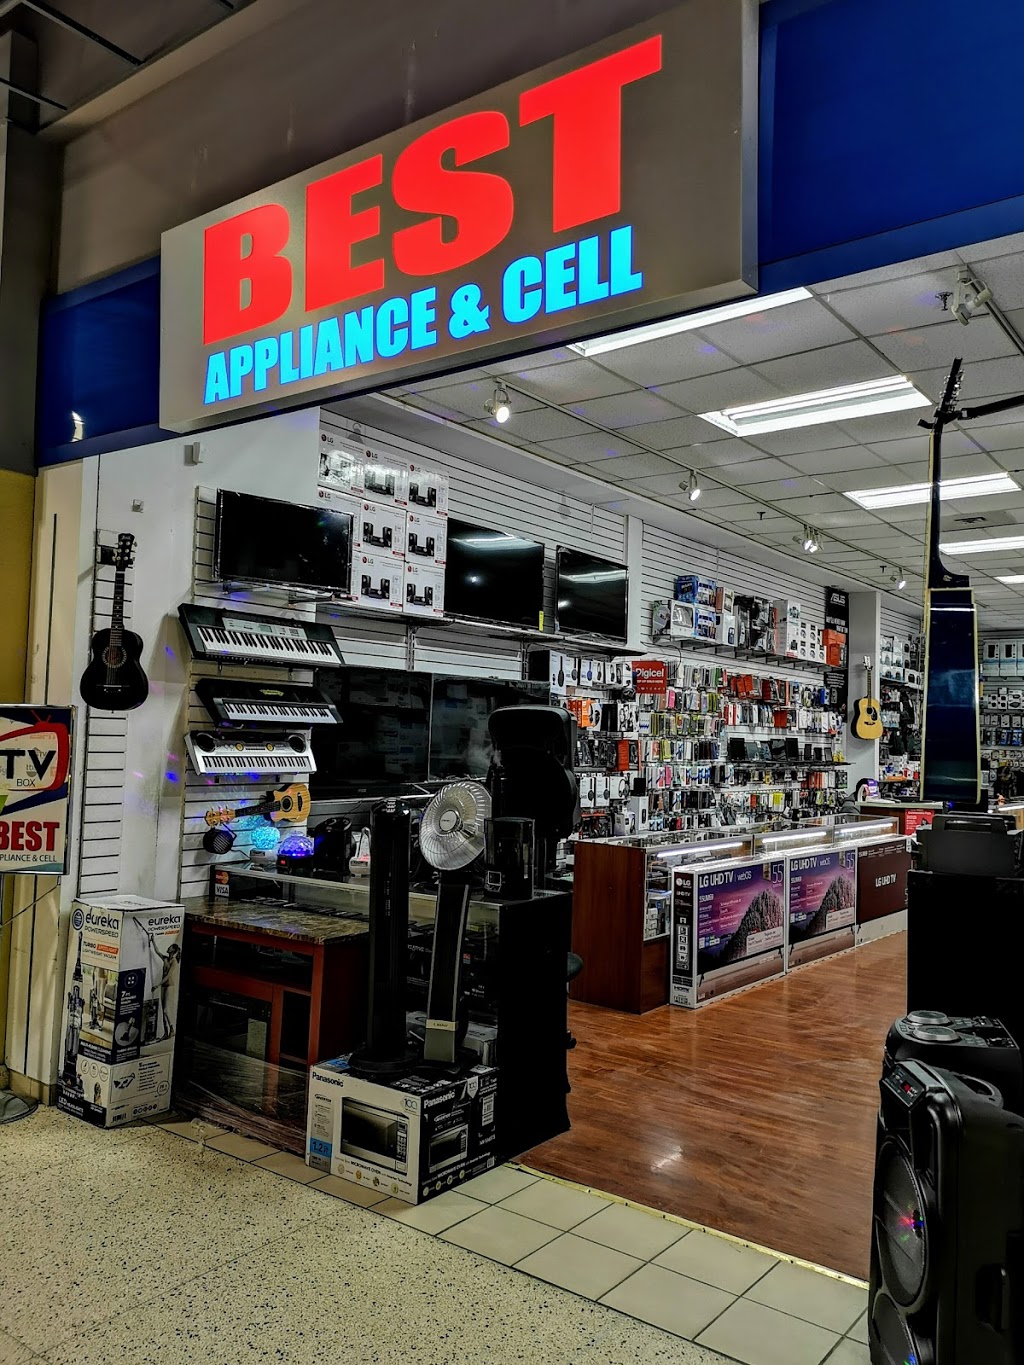 Best Appliance & cell | 1877 Finch Ave W, North York, ON M3N 2V2, Canada | Phone: (416) 245-2600